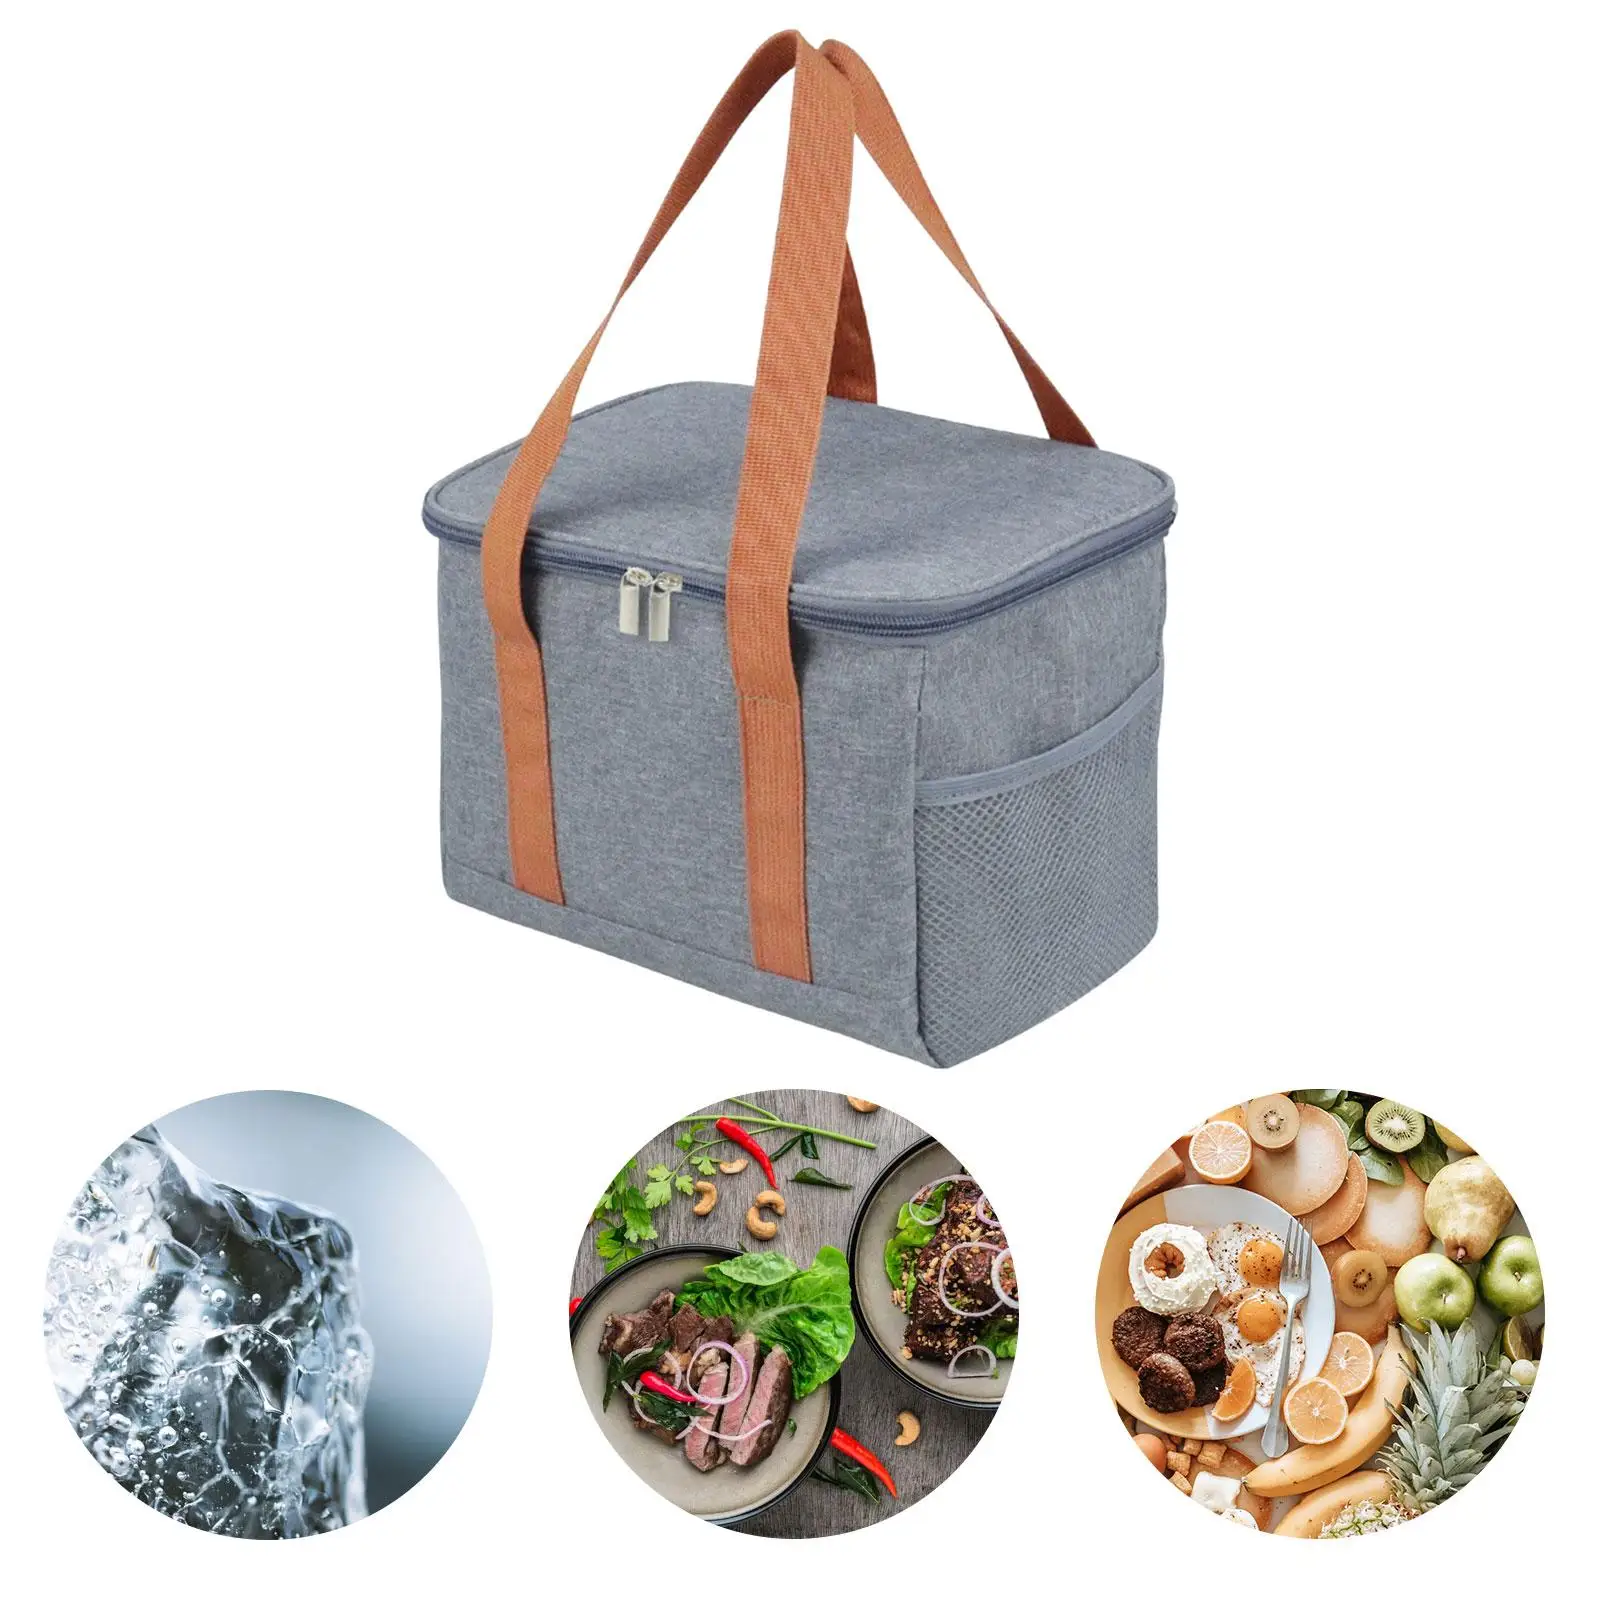 Lunch Box Bag Storage Case Thermal Insulated Handbag Portable Waterproof Food Cooler Bag for School Outdoor Work Children Adults